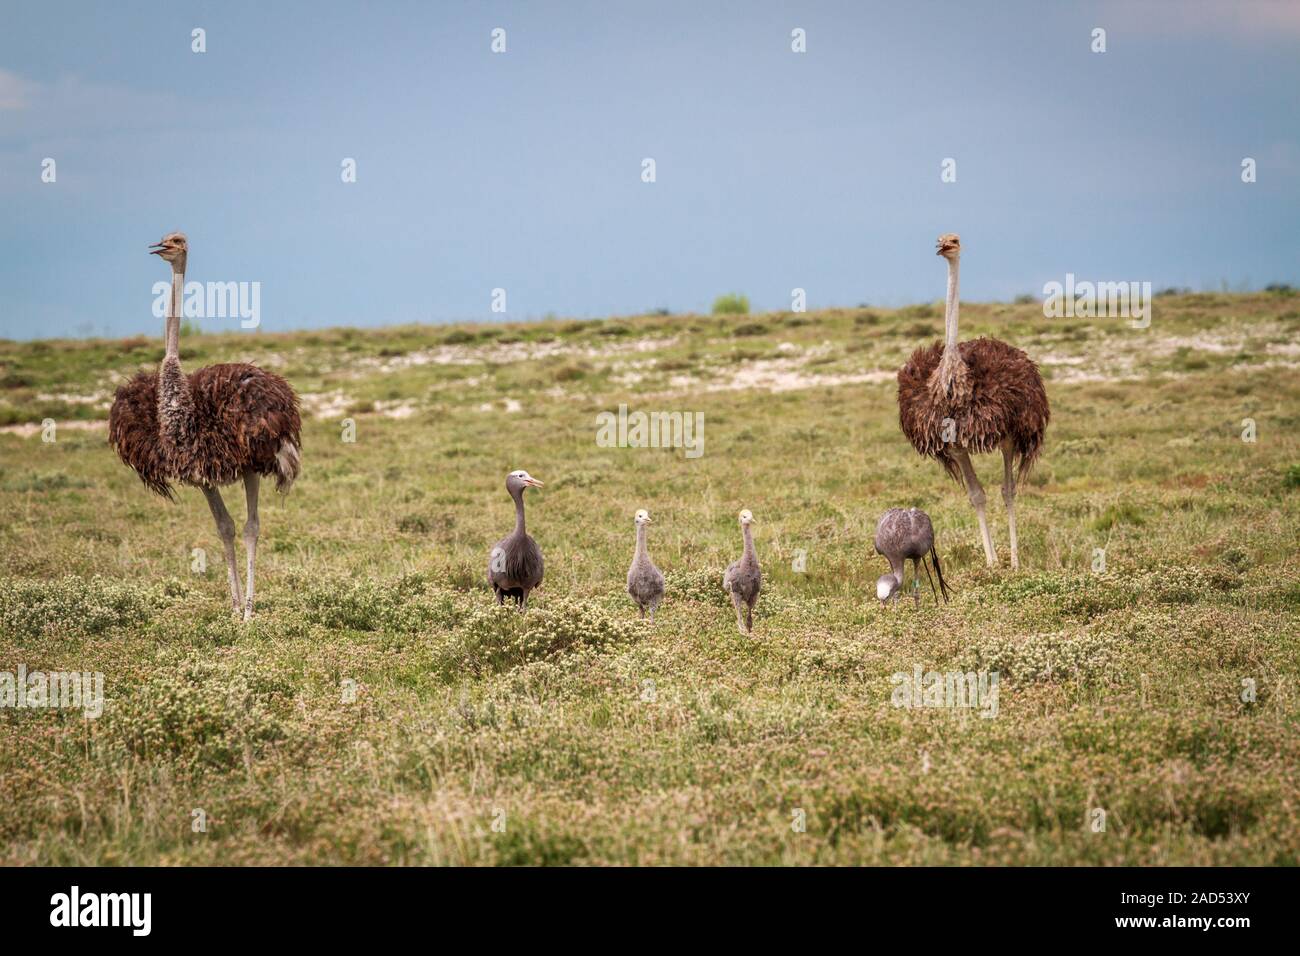 Family of Blue cranes with two Ostriches. Stock Photo